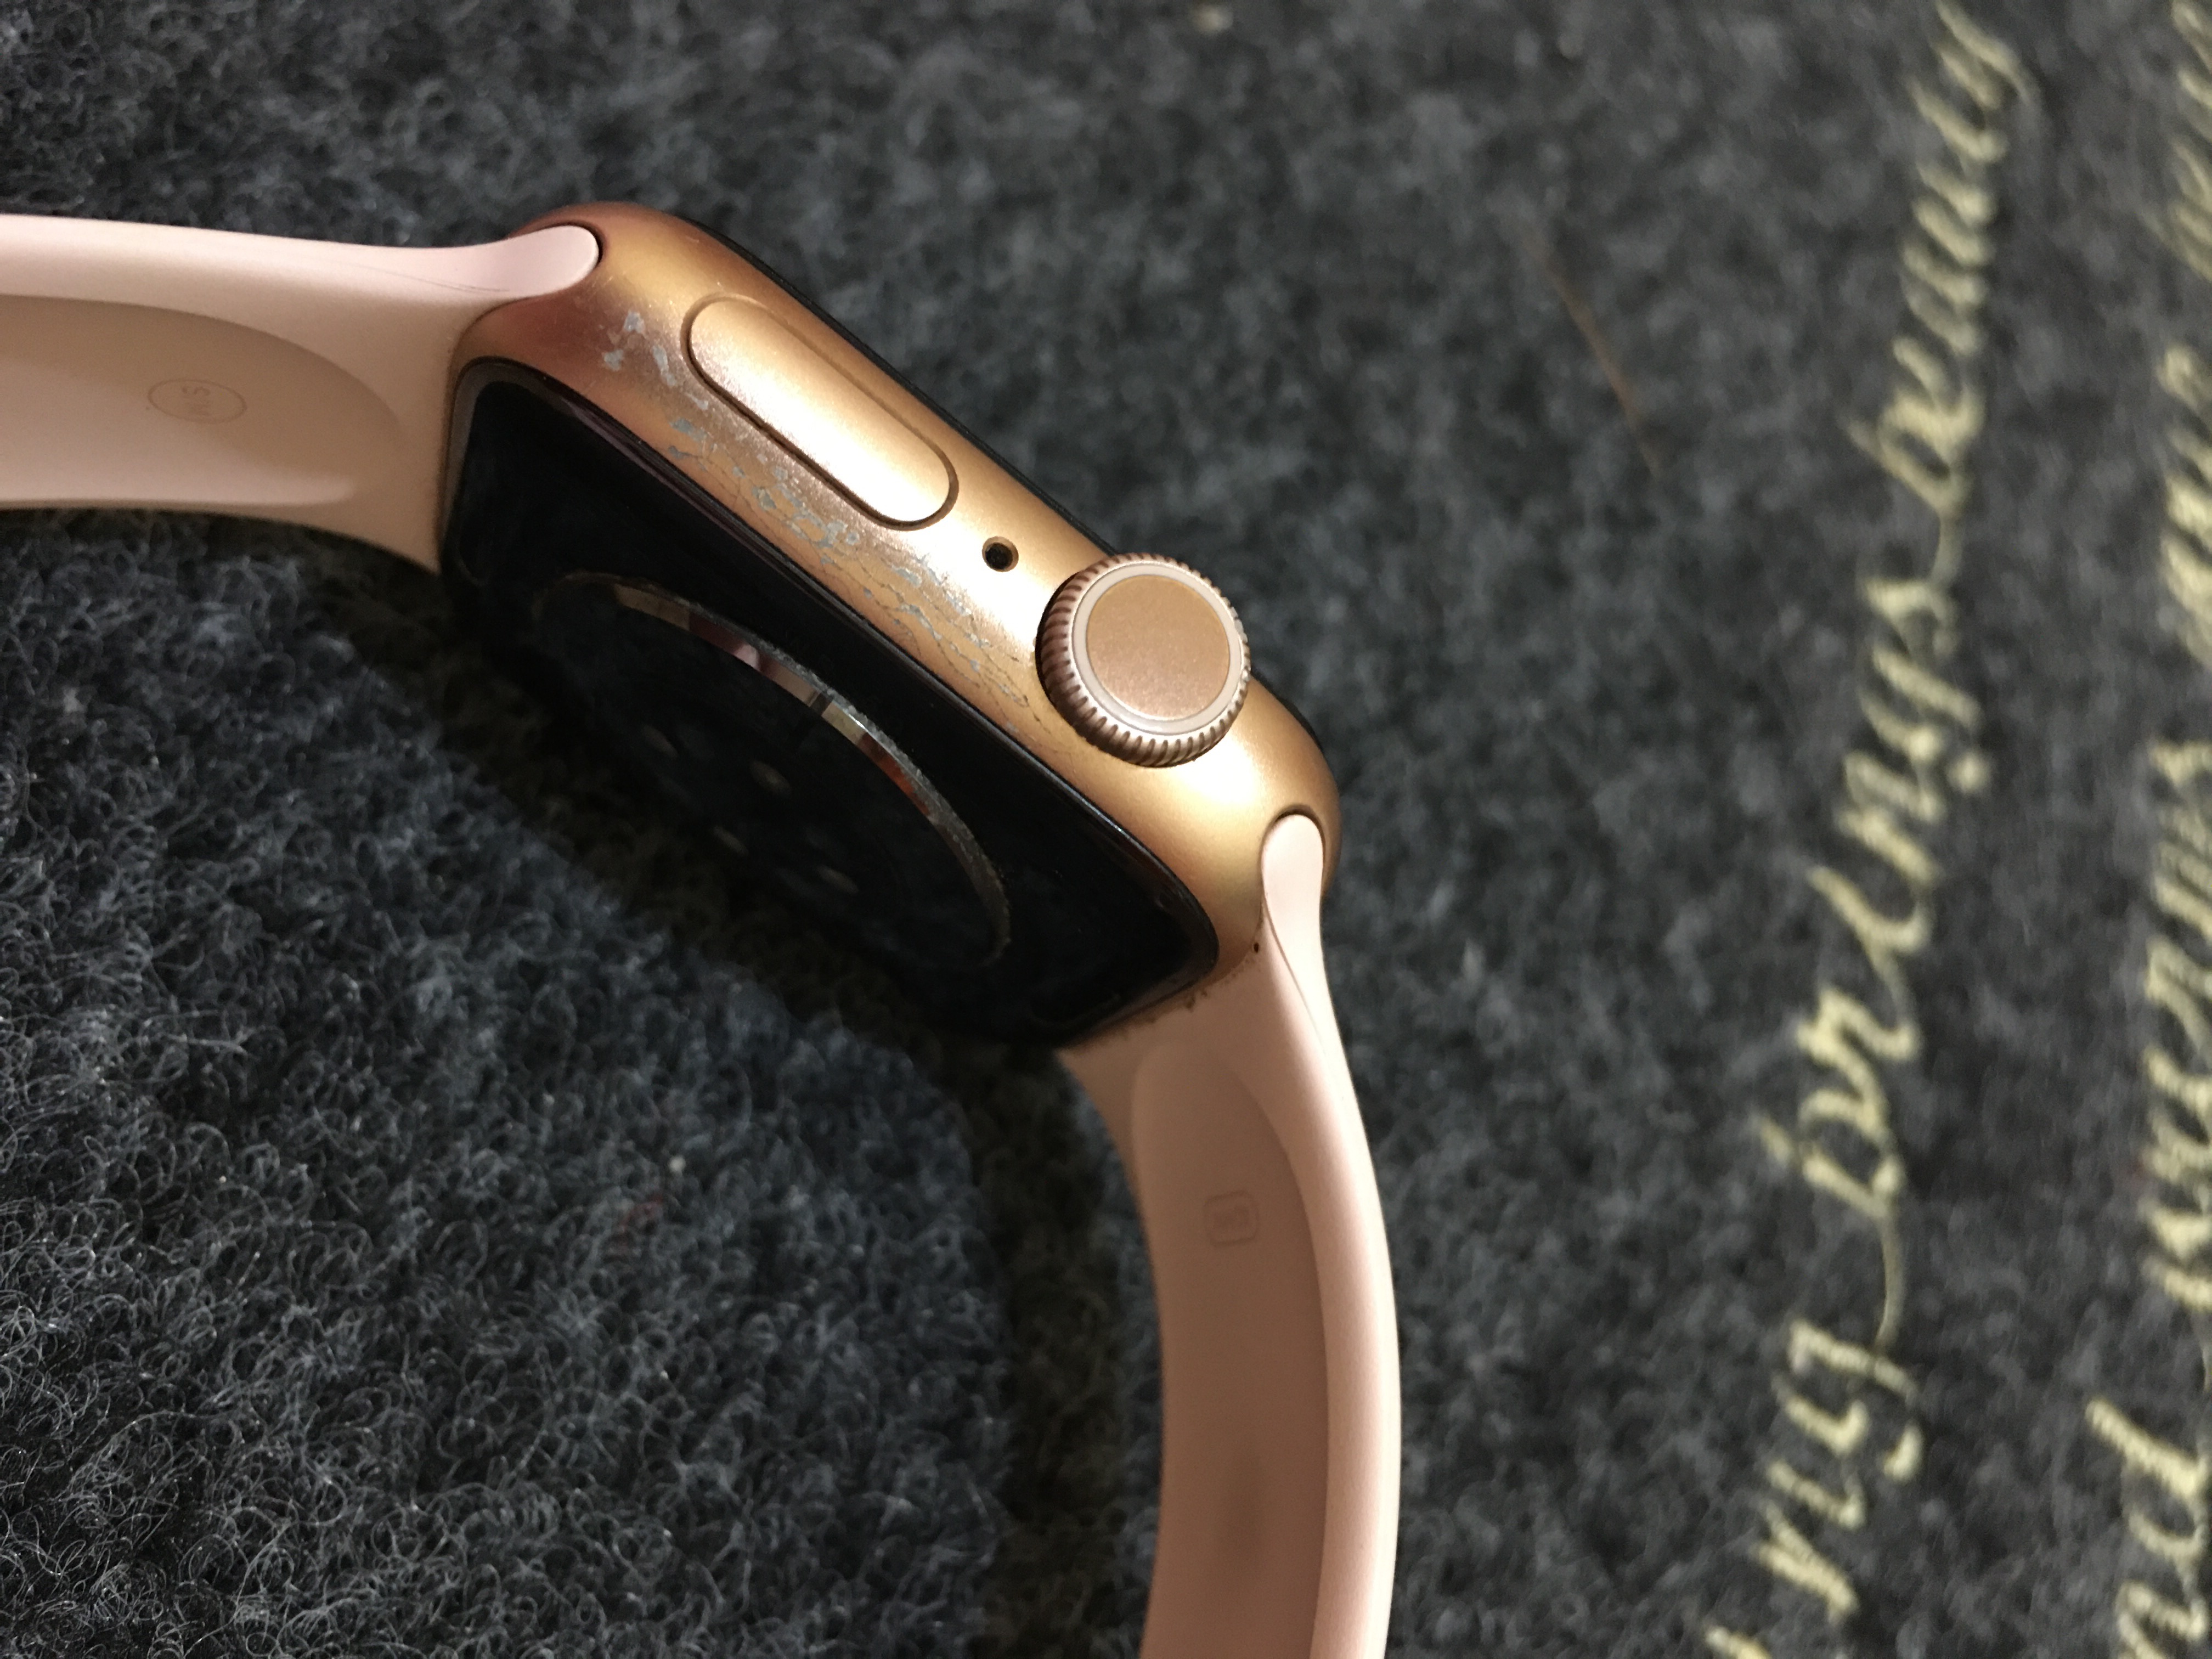 Users discover stainless steel Apple Watch scratches easily, the